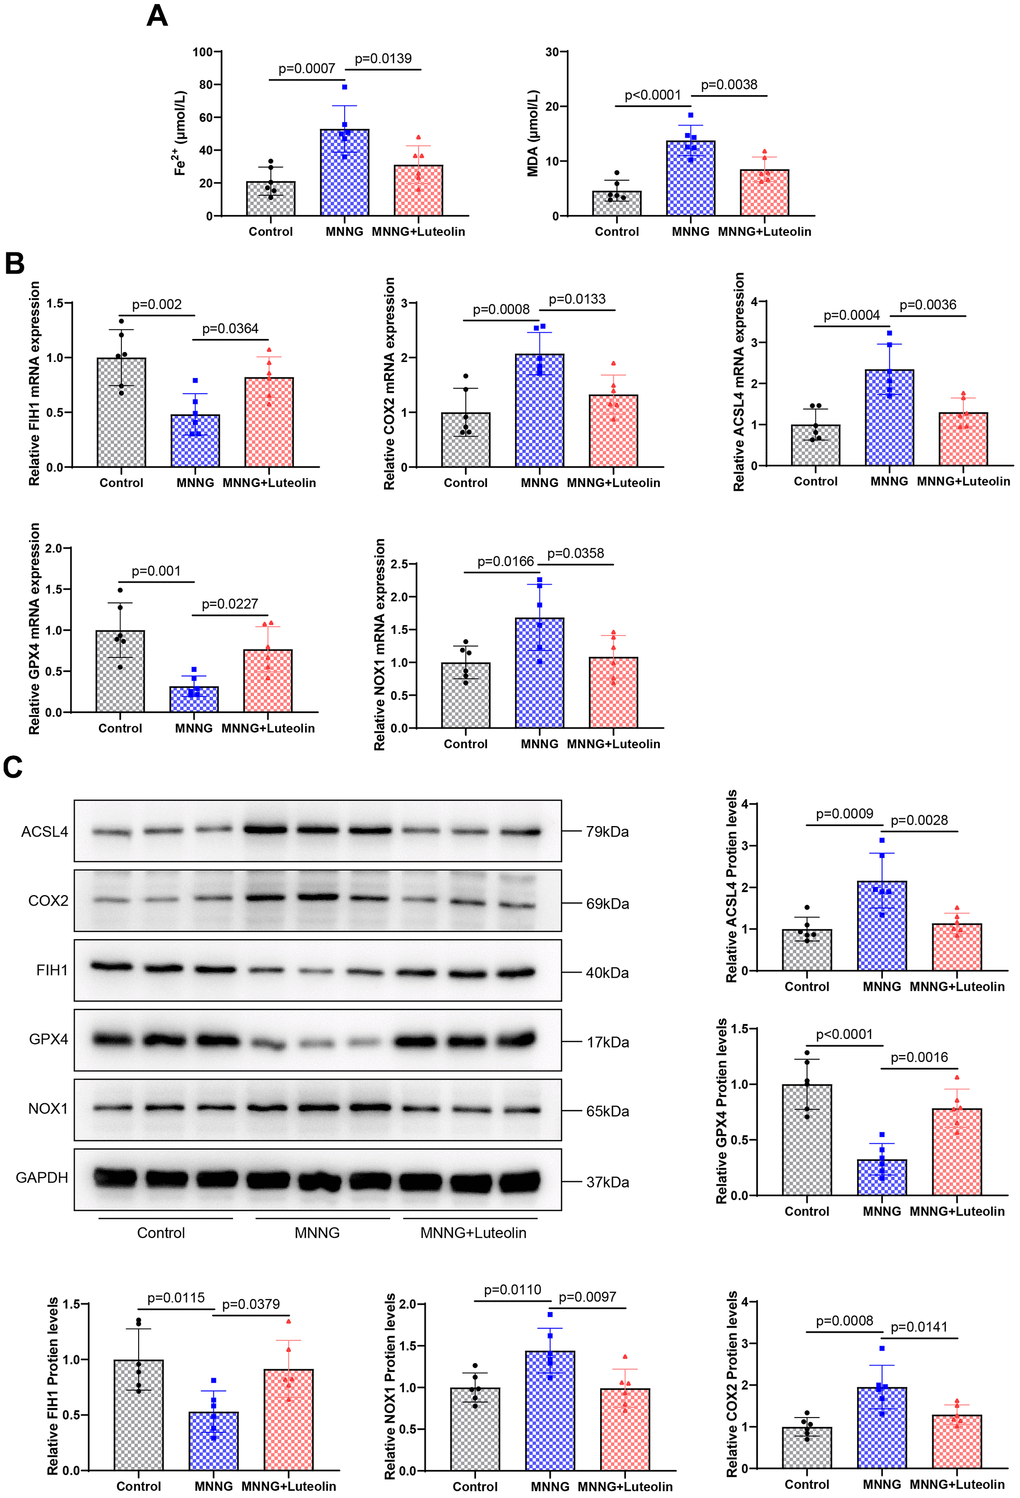 Luteolin inhibits ferroptosis in rat gastric tissue. (A) Changes in the levels of Fe2+ and MDA in gastric tissues of luteolin-treated rats. (B) Changes in the mRNA expression of FIH1, COX2, ACSL4, GPX4, and NOX1 were detected using qPCR. (C) Western blot analysis of the protein expression levels of FIH1, COX2, ACSL4, GPX4, and NOX1.